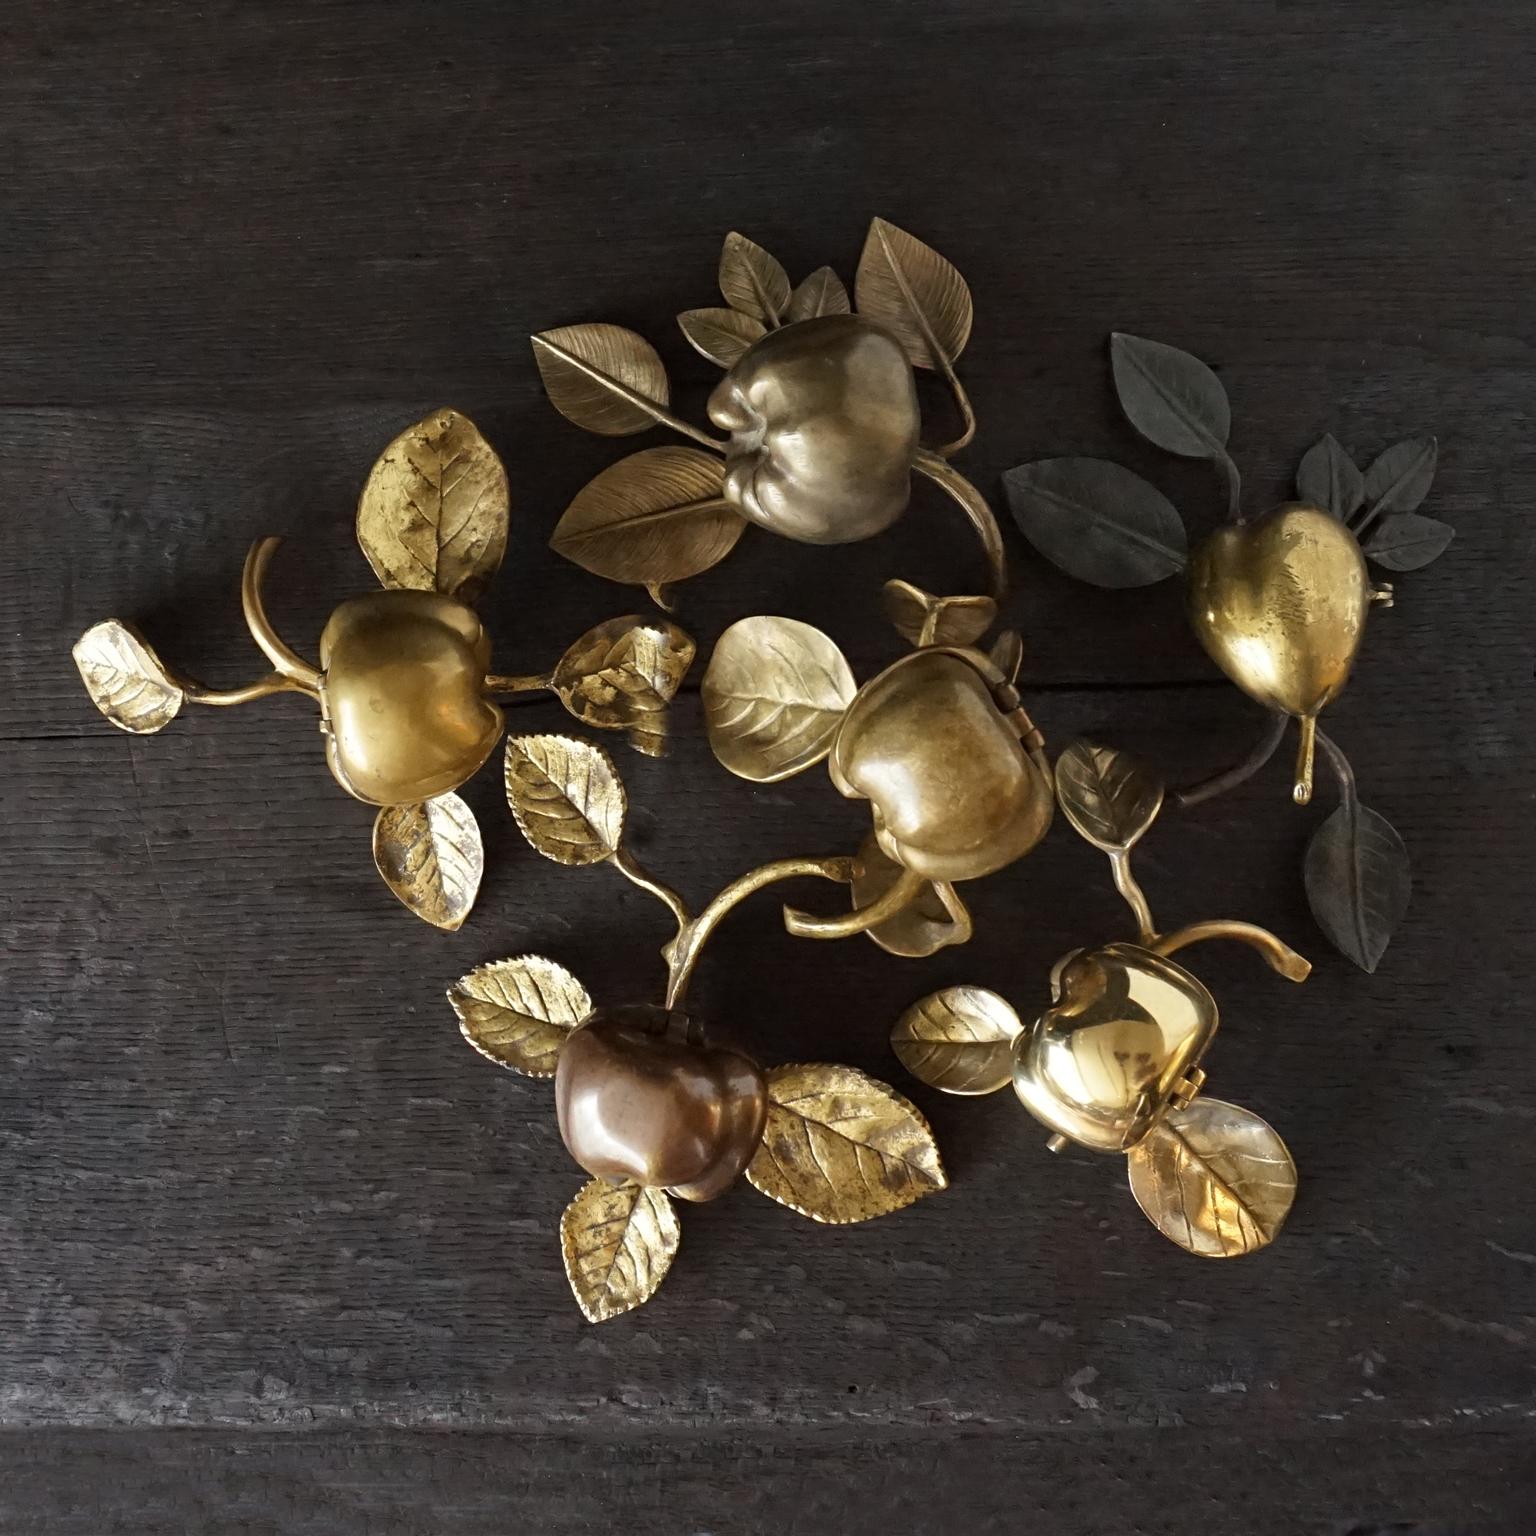 Antique hinged bronze patinated apples and a pear trinket boxes on a twig with leaves, to keep or collect your little trinkets in.
They used to be called bed-apple or bed-pear, and they were used for putting your jewellery in on your nightstand